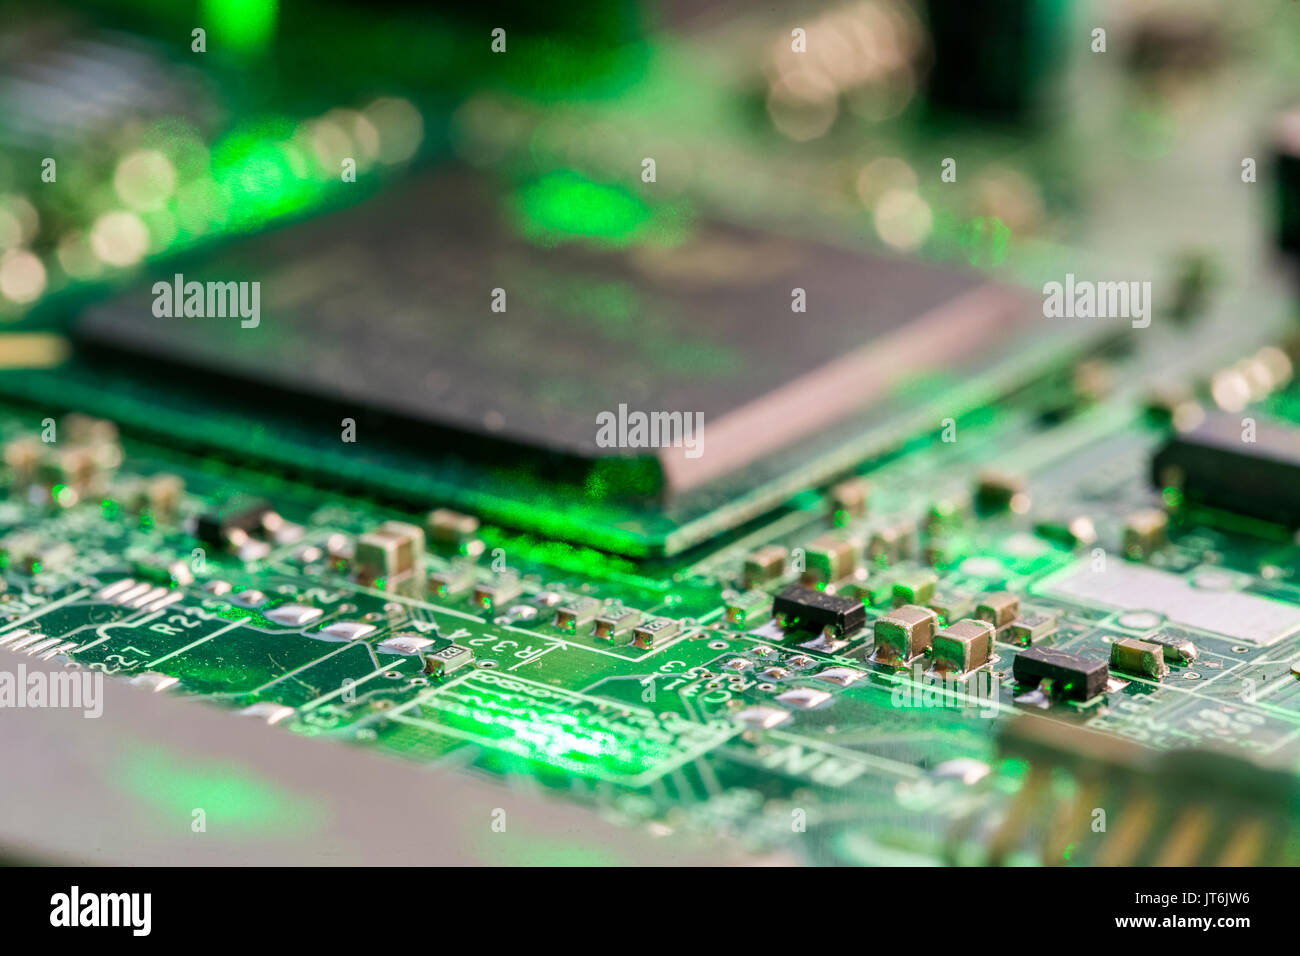 Computer components. Technology. Stock Photo